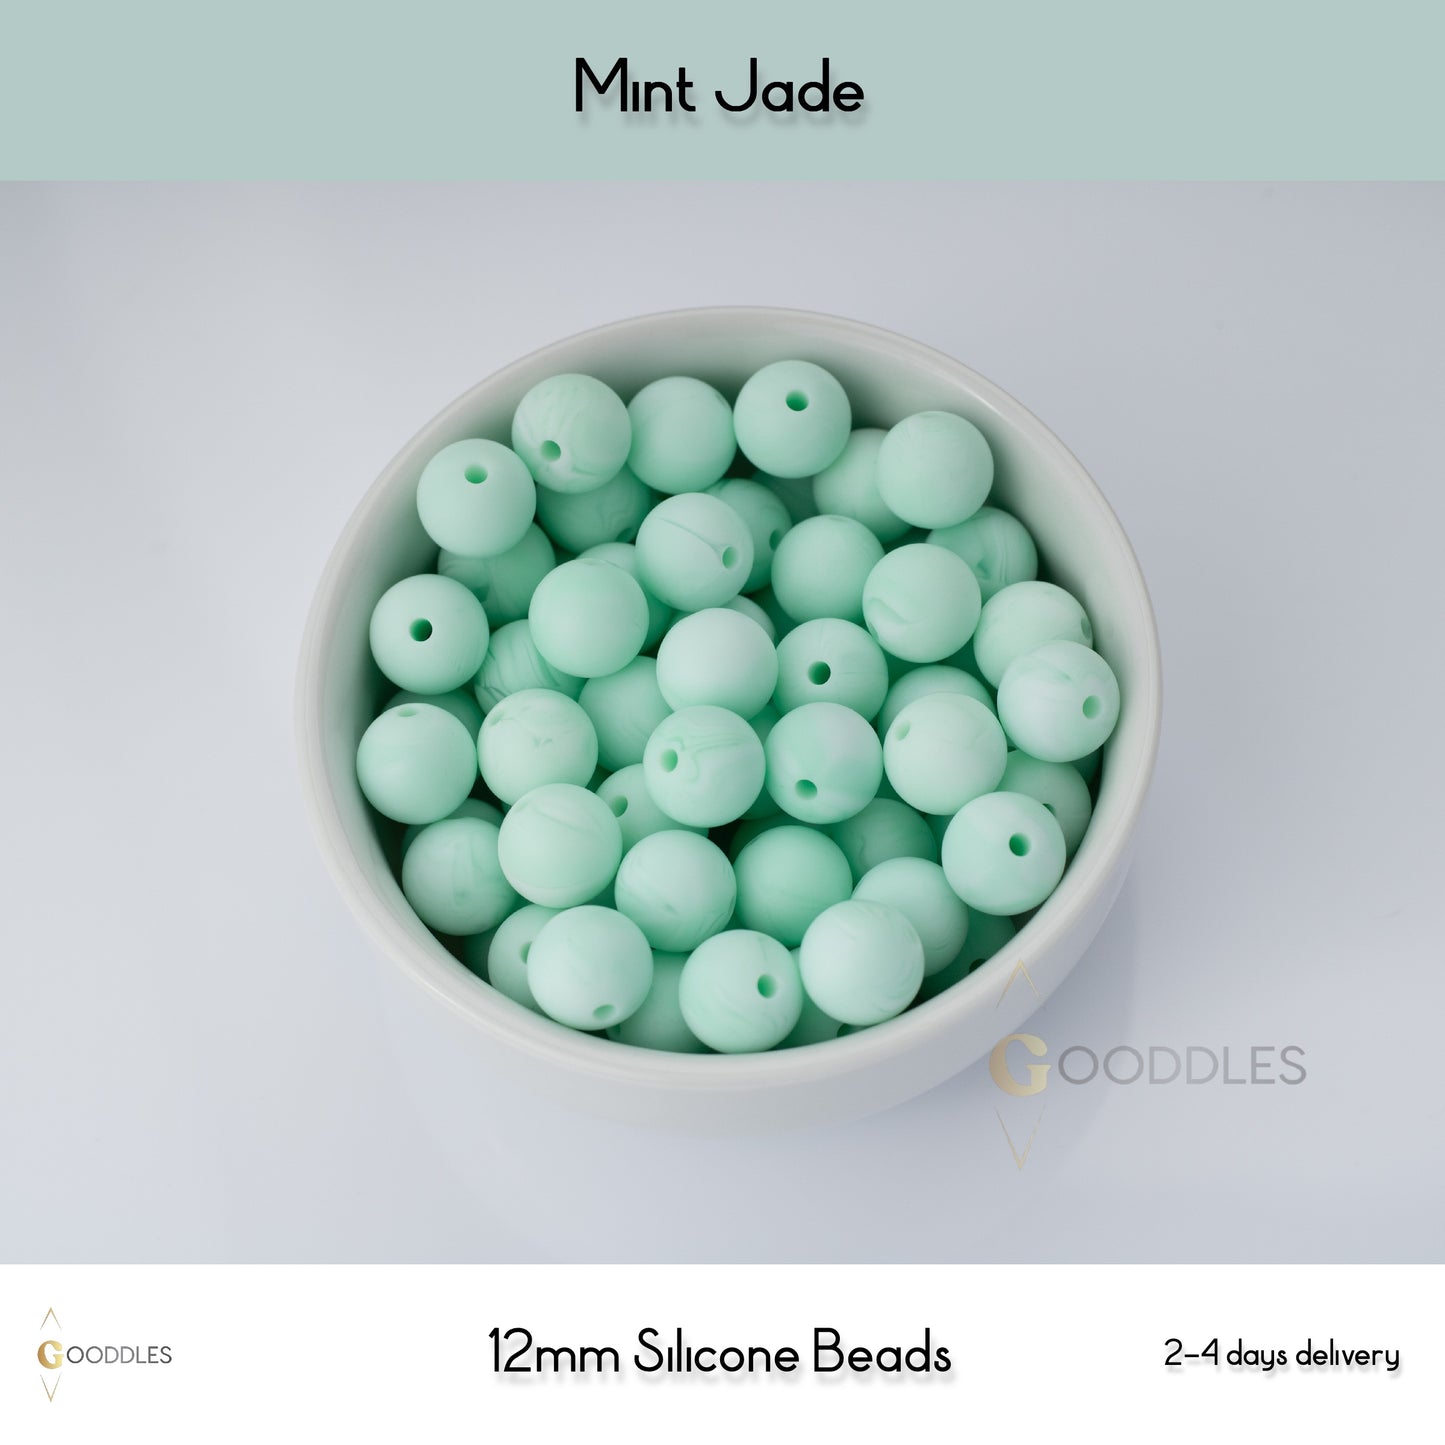 5pcs, Mint Jade Silicone Beads Round Silicone Beads